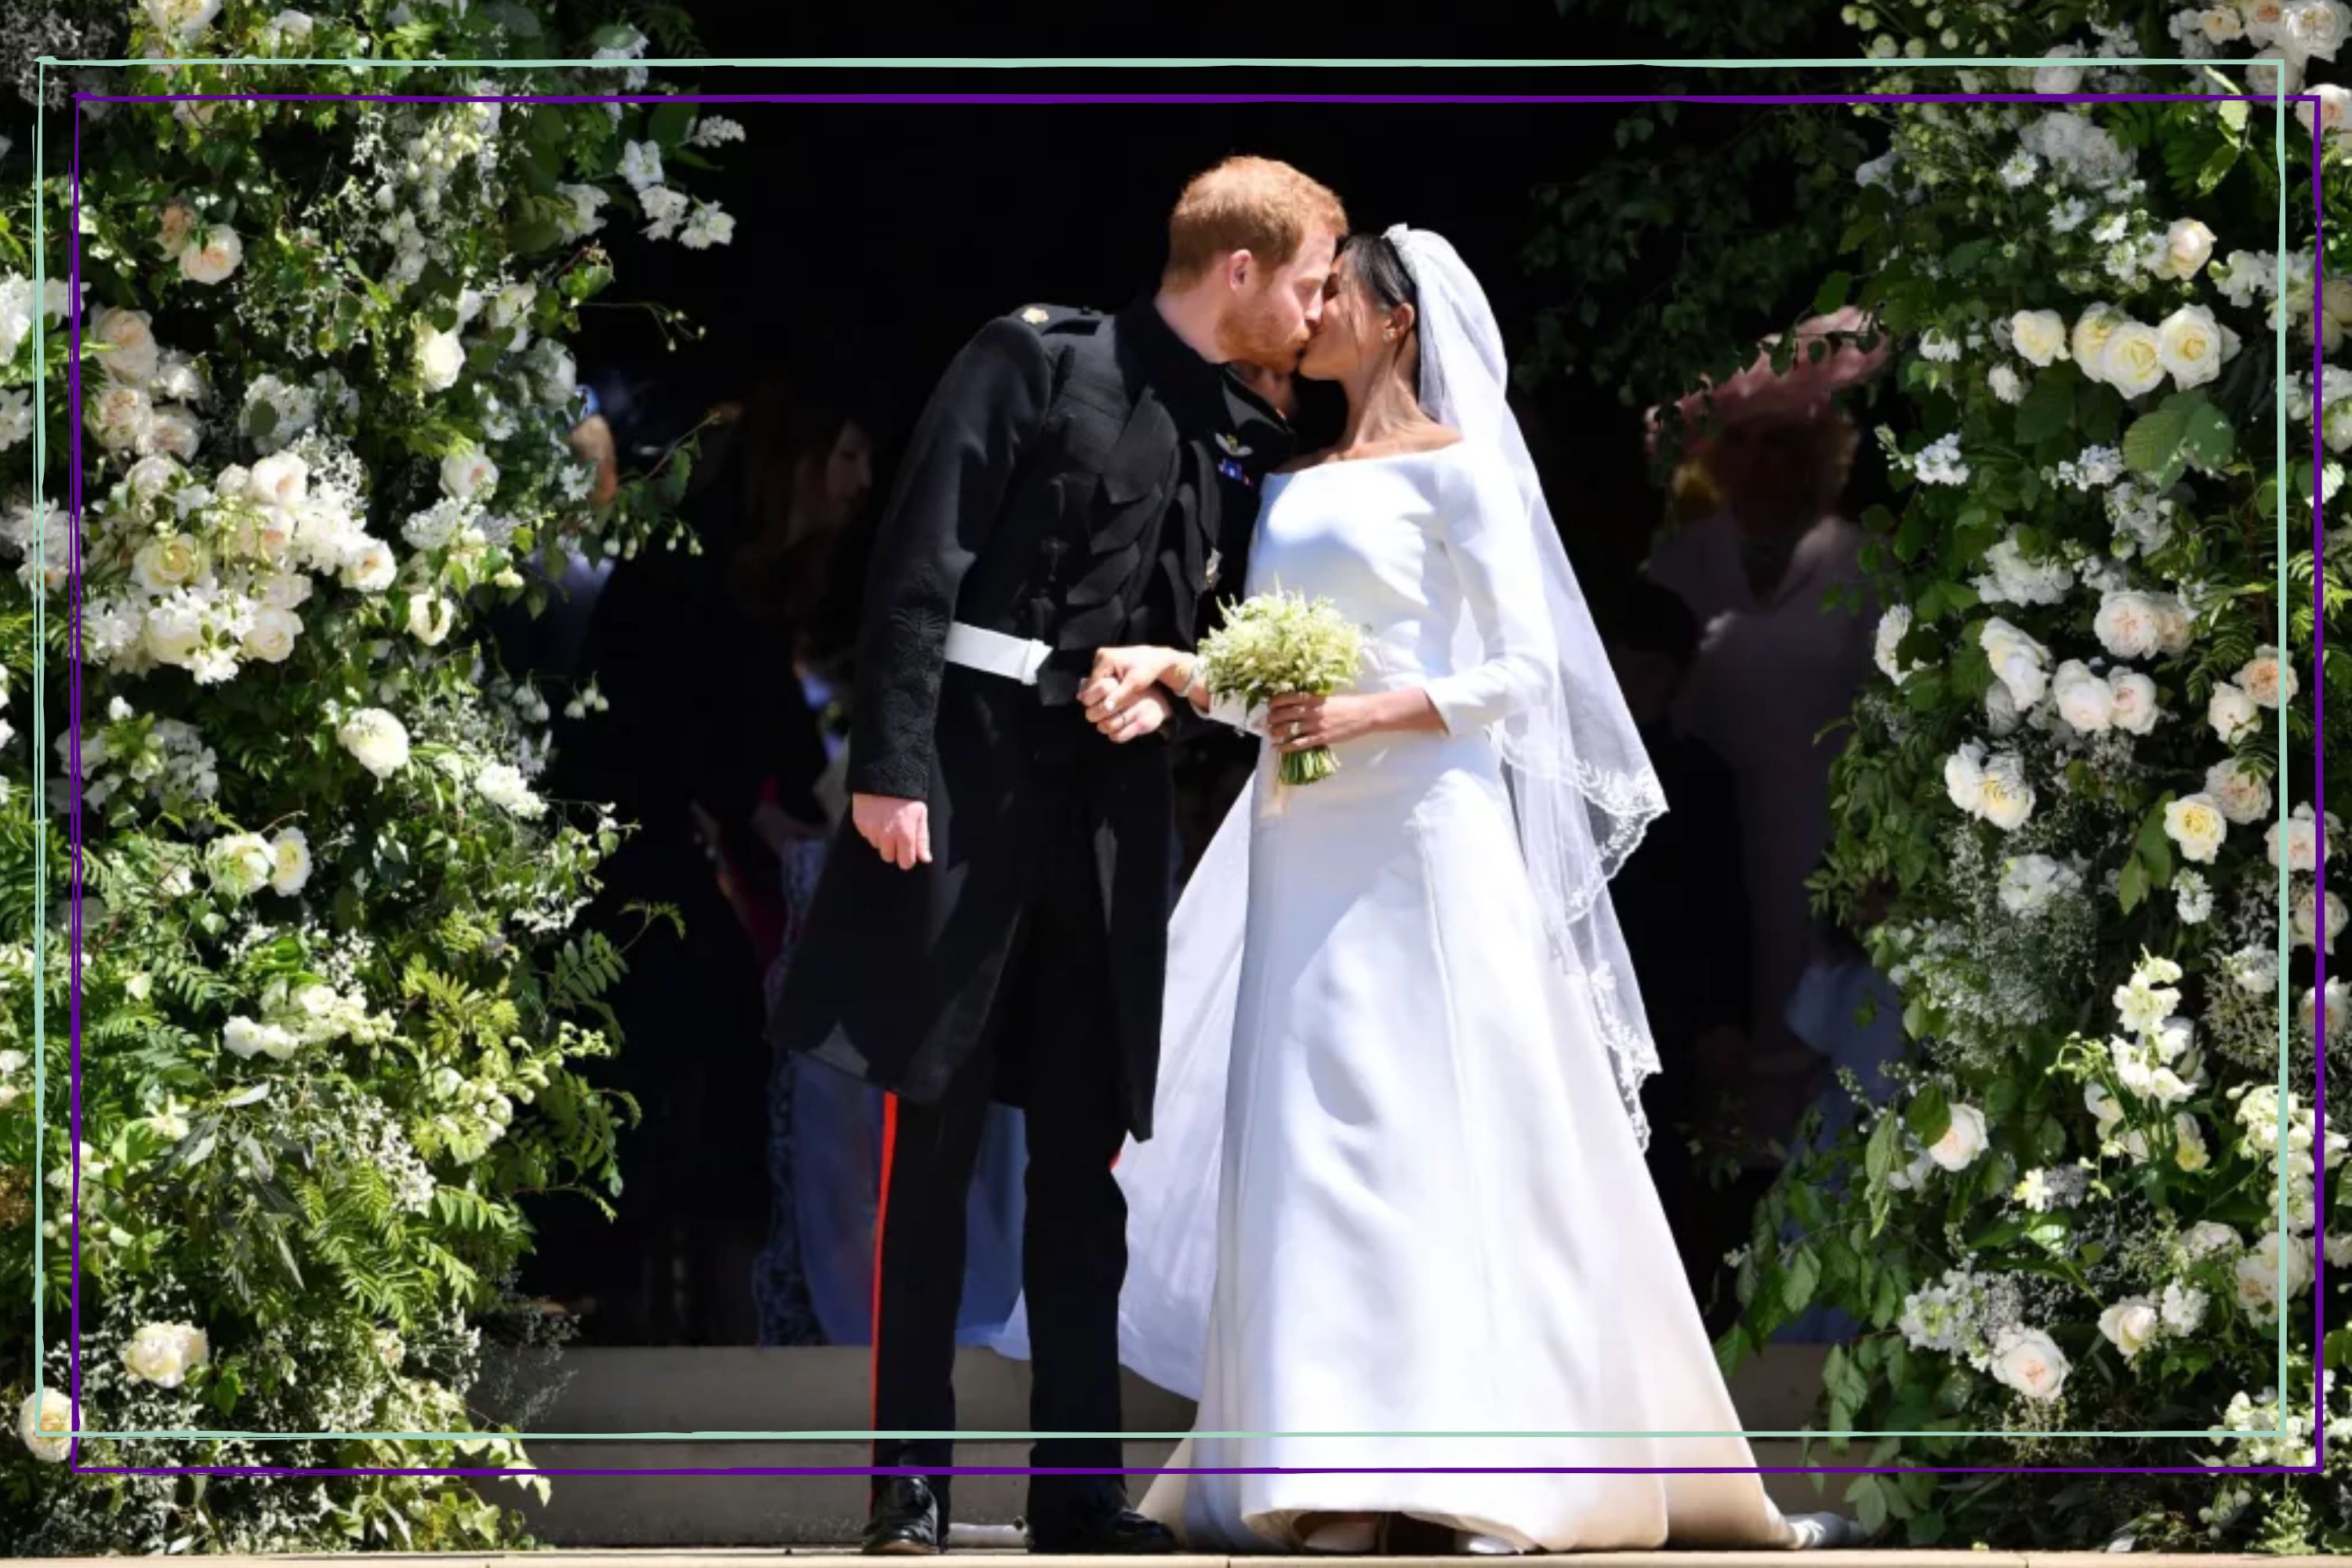 Meghan Markle's First Wedding Dress - What Meghan Wore to Her First Wedding